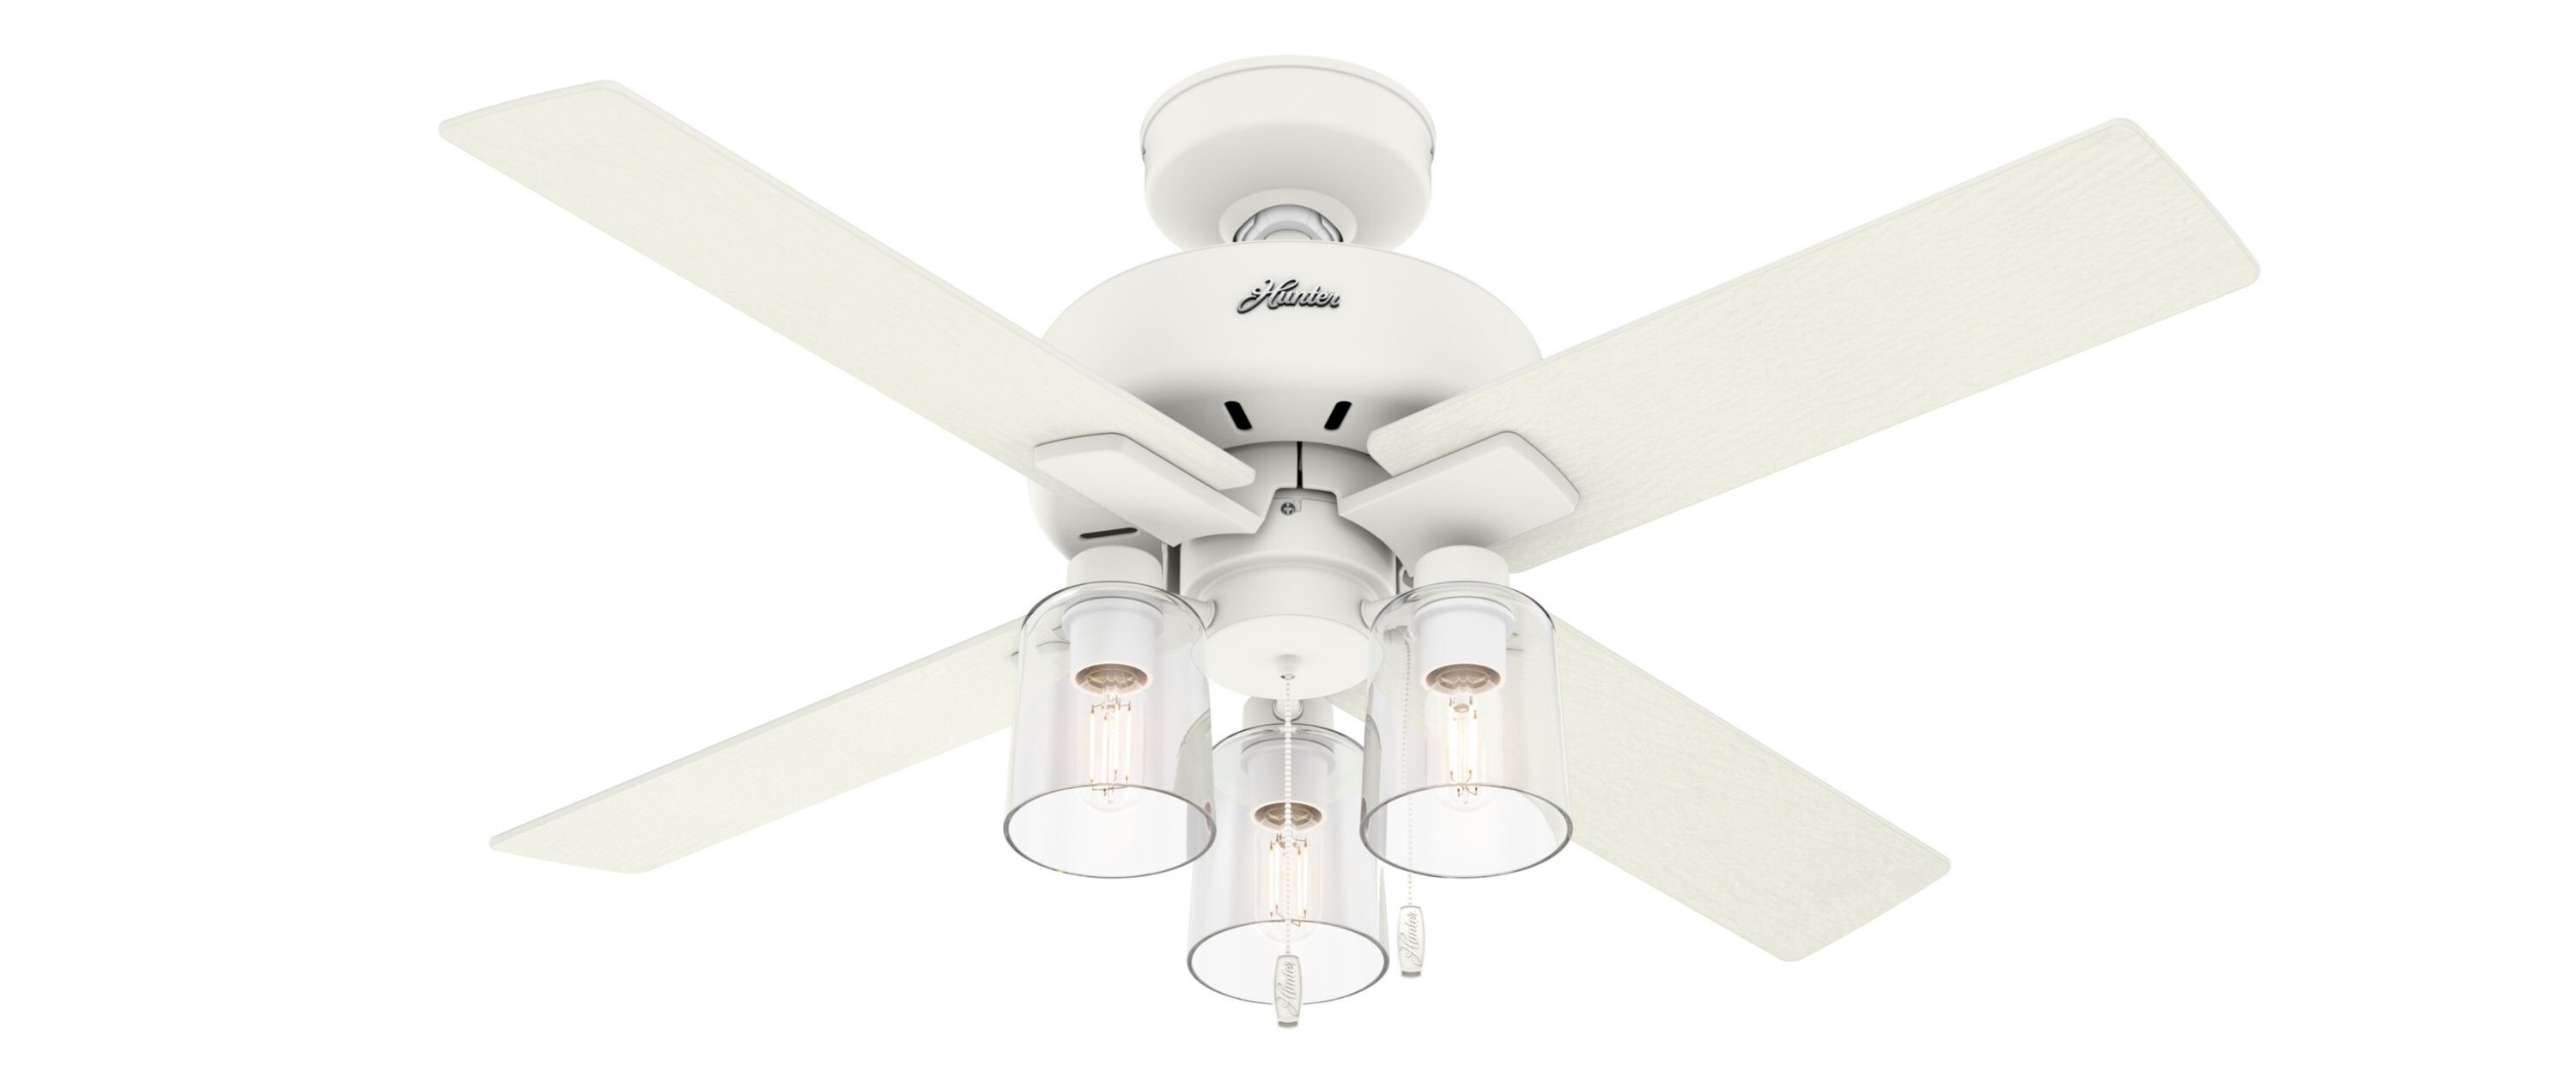 44 Hunter Pelston Indoor Ceiling Fan with LED Light and Pull Chain Matte Silver